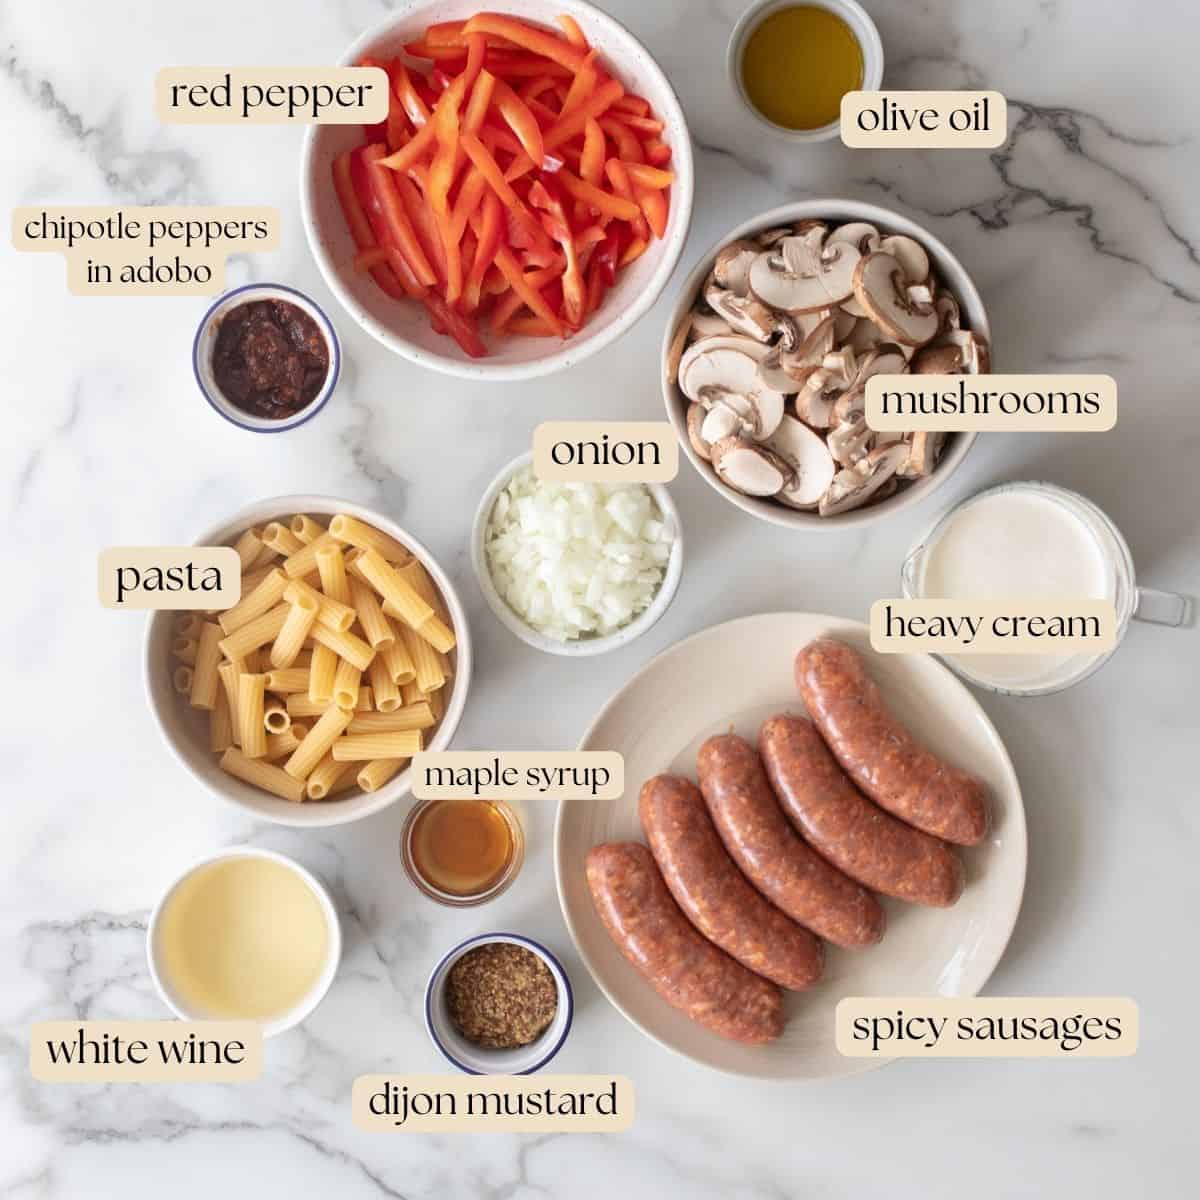 Ingredients to make spicy sausage pasta in bowls, plates and cups on a countertop.